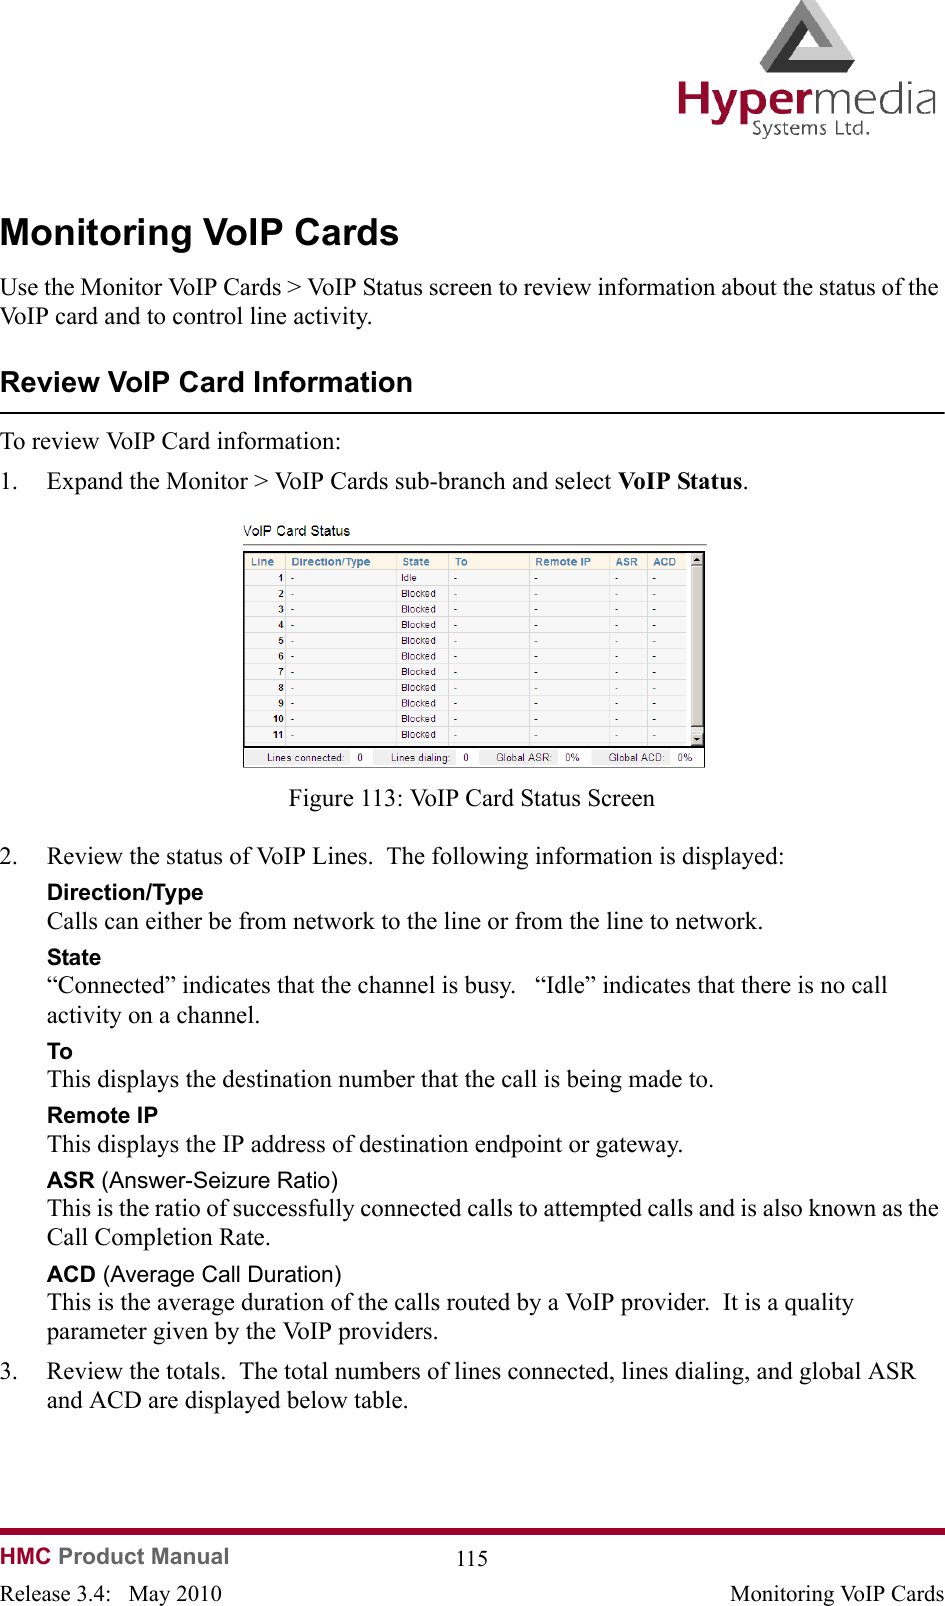 HMC Product Manual  115Release 3.4:   May 2010 Monitoring VoIP CardsMonitoring VoIP CardsUse the Monitor VoIP Cards &gt; VoIP Status screen to review information about the status of the VoIP card and to control line activity. Review VoIP Card InformationTo review VoIP Card information: 1. Expand the Monitor &gt; VoIP Cards sub-branch and select VoIP Status.                Figure 113: VoIP Card Status Screen2. Review the status of VoIP Lines.  The following information is displayed:Direction/TypeCalls can either be from network to the line or from the line to network.State“Connected” indicates that the channel is busy.   “Idle” indicates that there is no call activity on a channel.ToThis displays the destination number that the call is being made to.Remote IPThis displays the IP address of destination endpoint or gateway.ASR (Answer-Seizure Ratio) This is the ratio of successfully connected calls to attempted calls and is also known as the Call Completion Rate.  ACD (Average Call Duration)This is the average duration of the calls routed by a VoIP provider.  It is a quality parameter given by the VoIP providers.3. Review the totals.  The total numbers of lines connected, lines dialing, and global ASR and ACD are displayed below table.